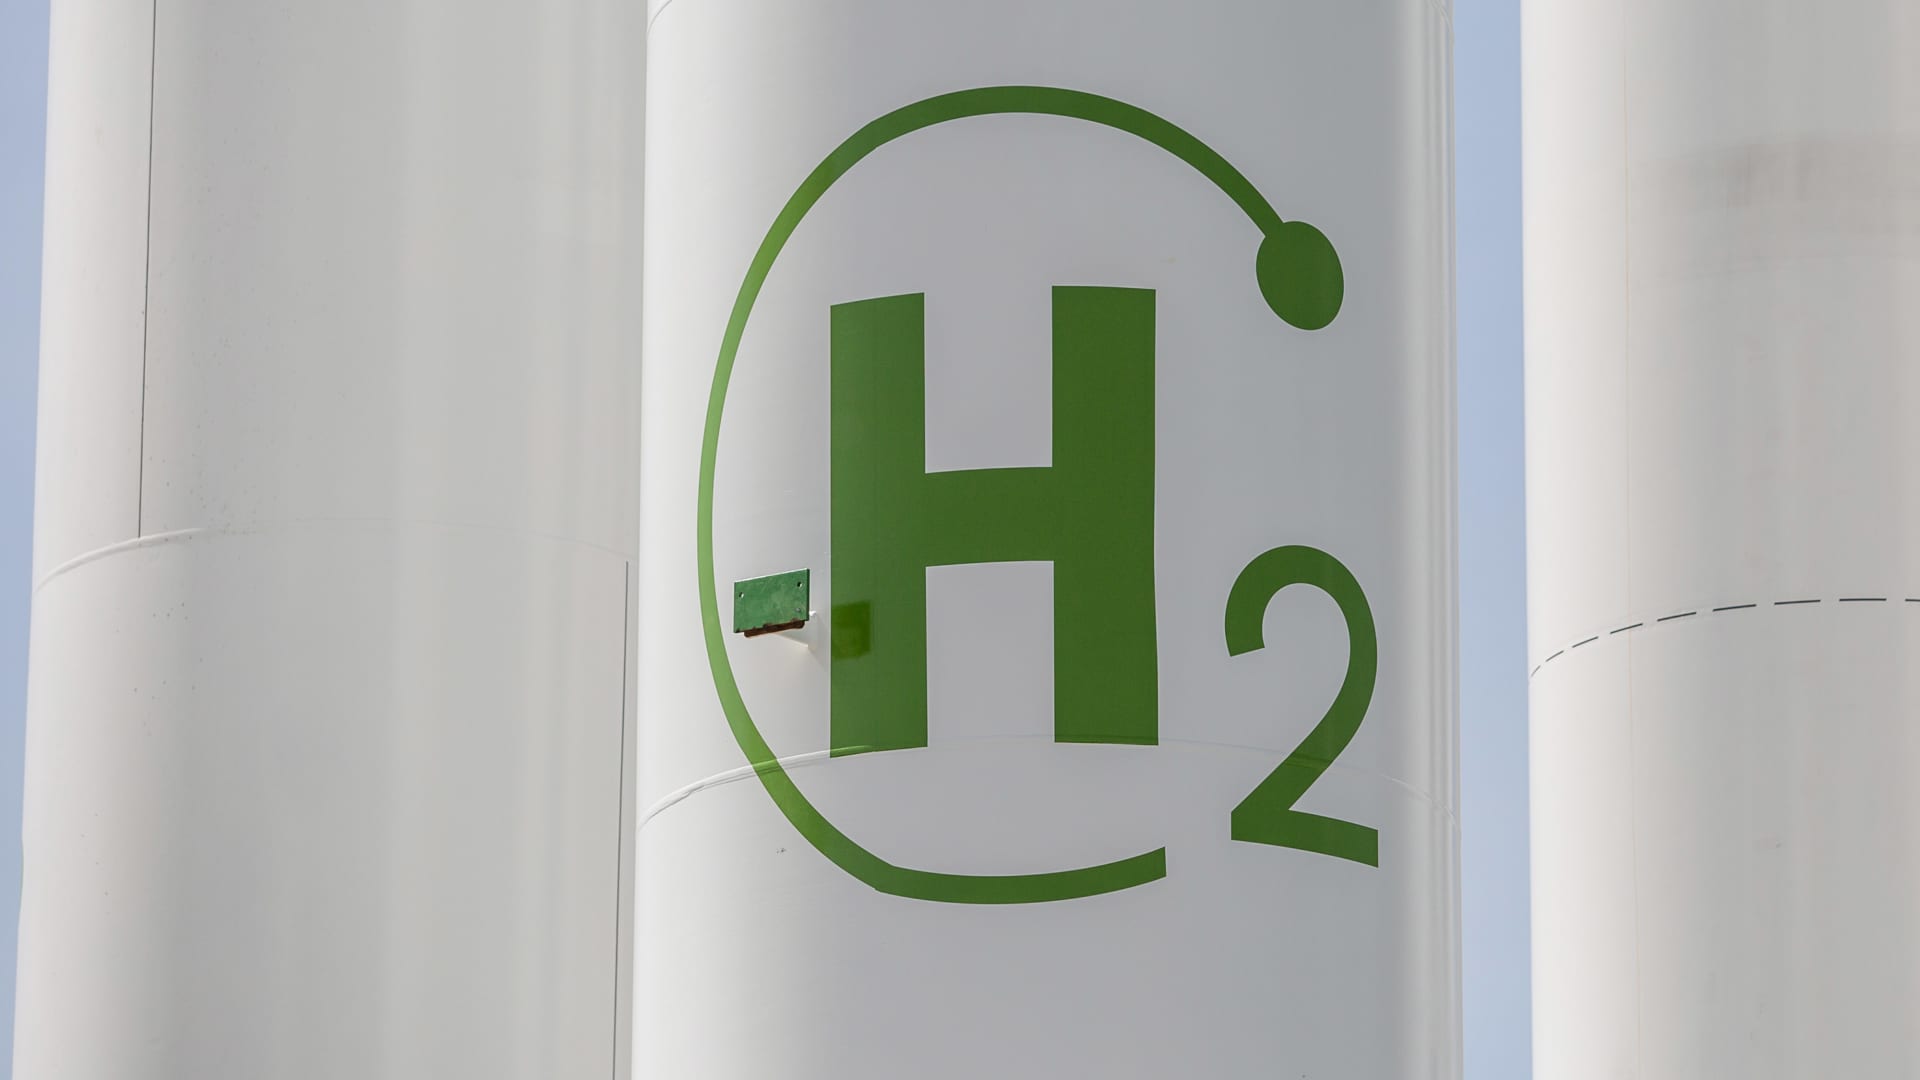 Want to money in on thoroughly clean hydrogen? HSBC names stocks to engage in the trend